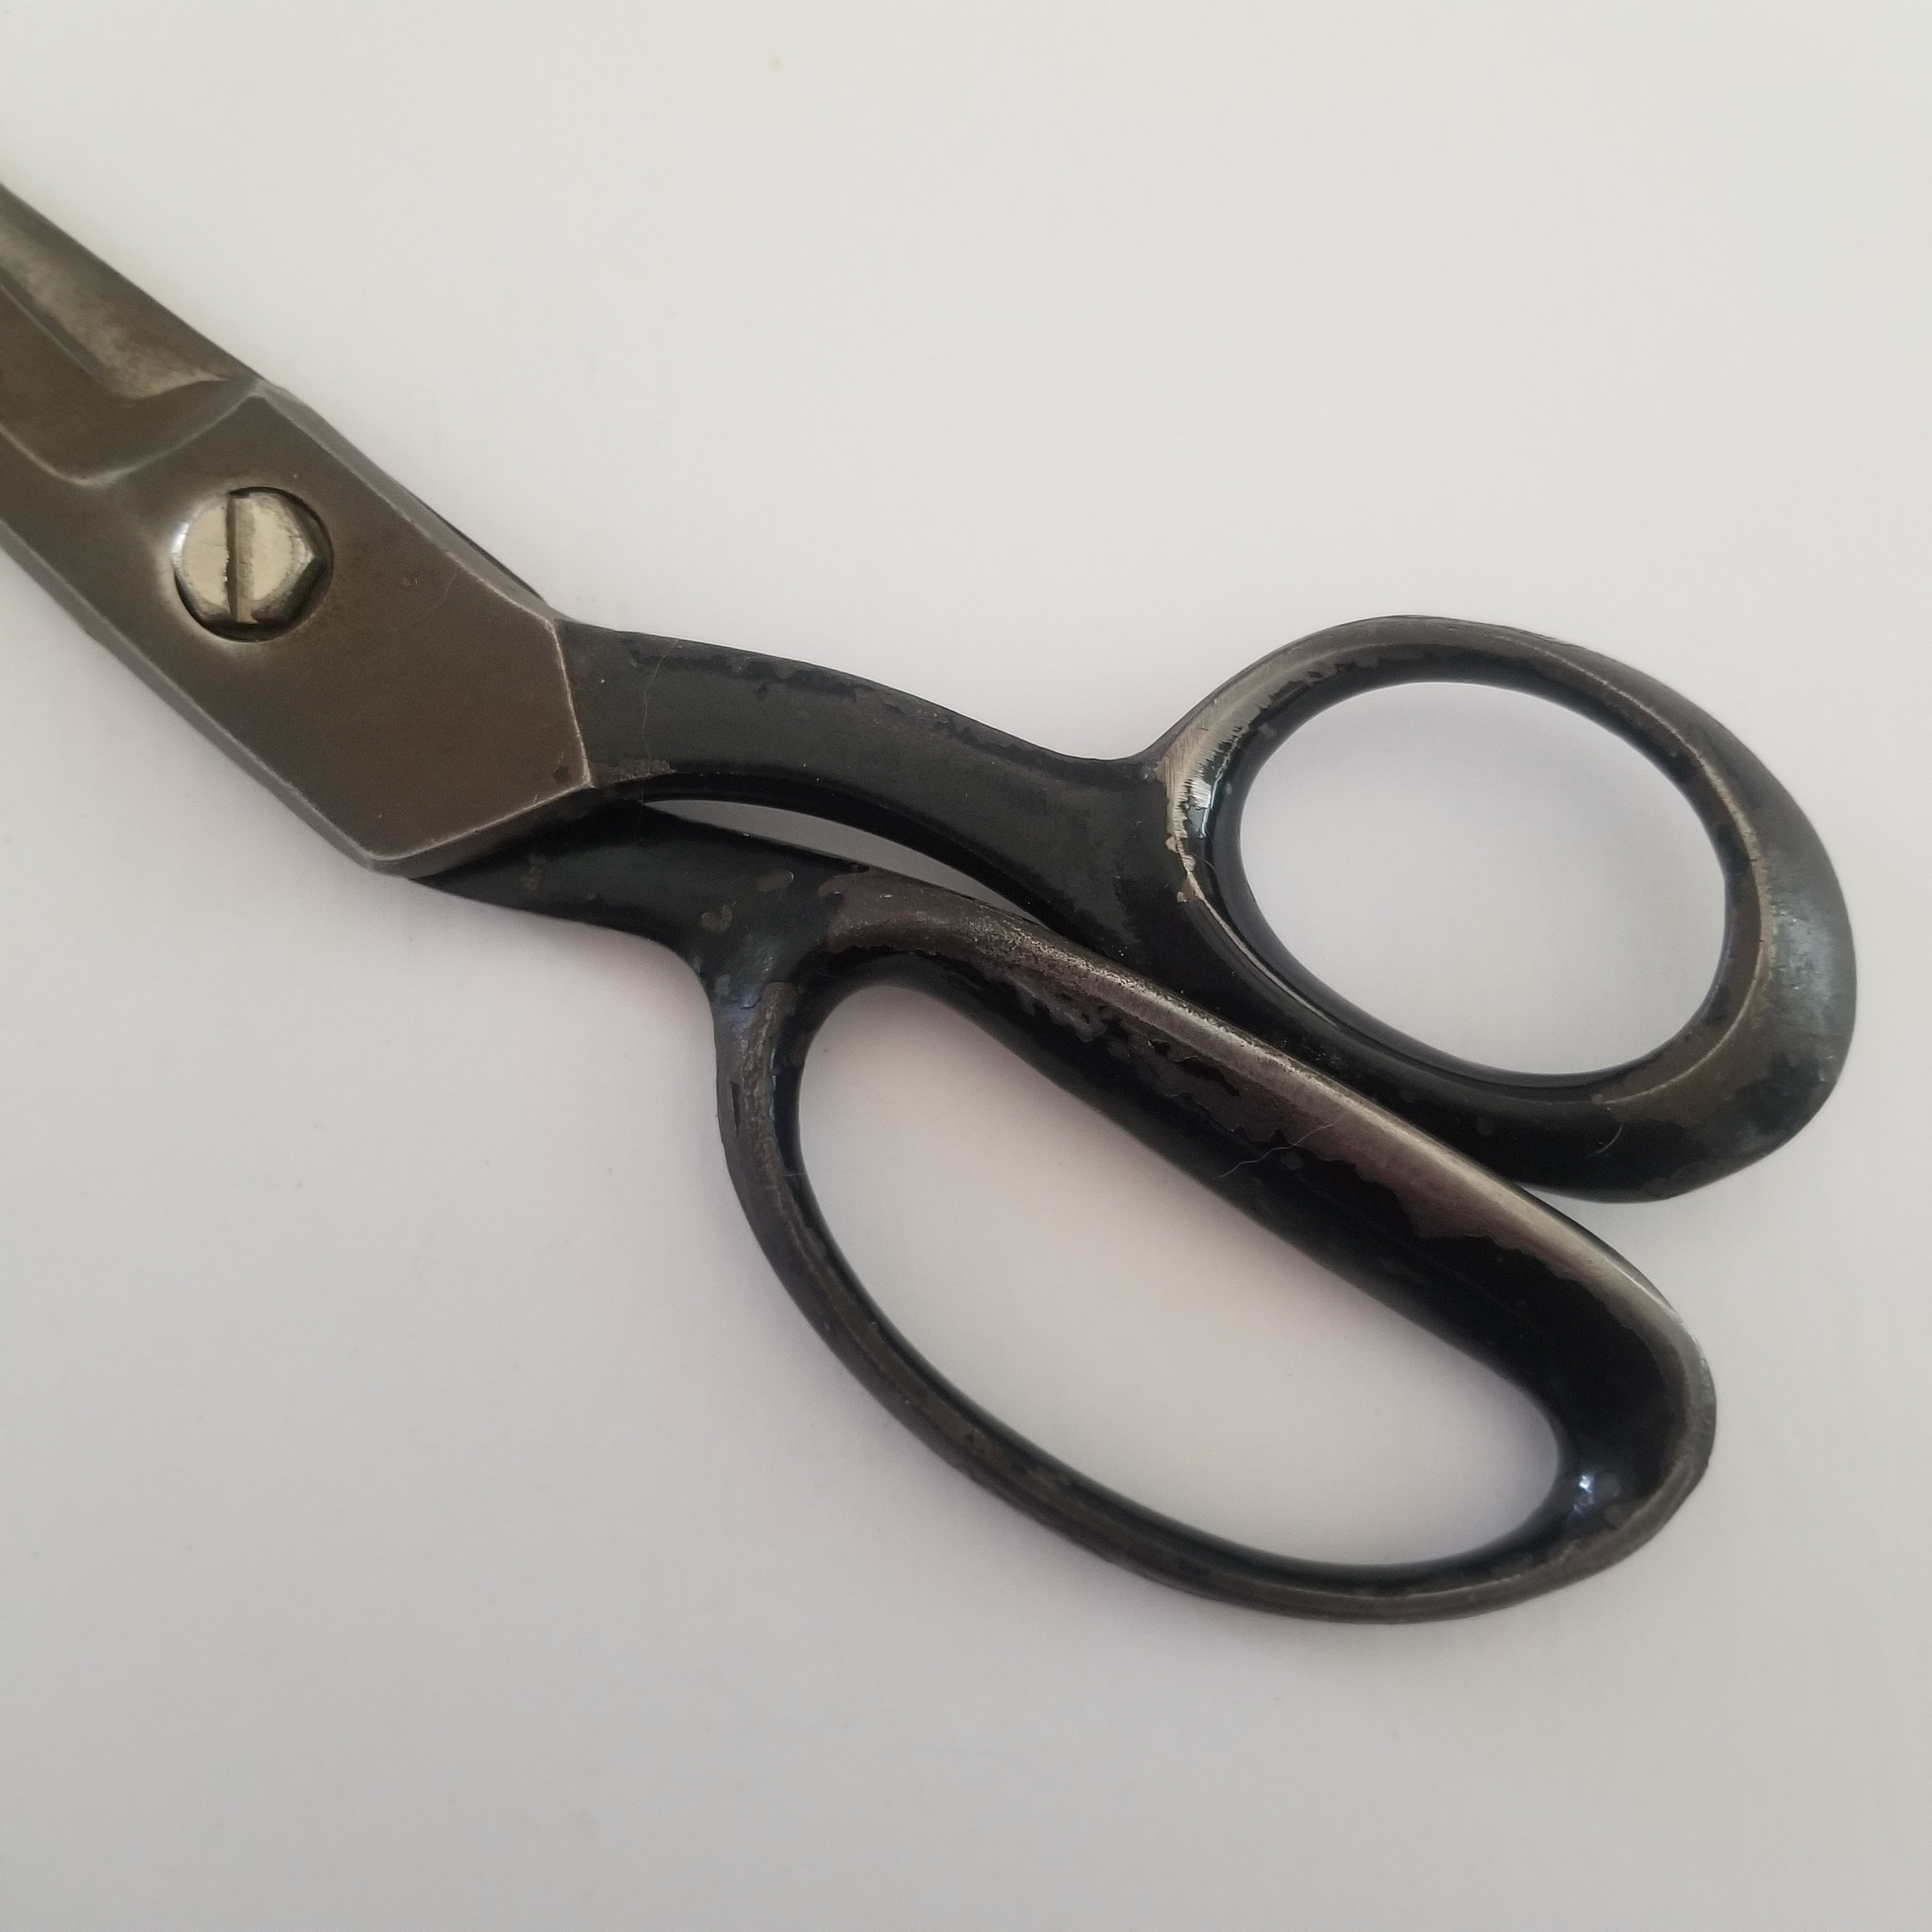 Vintage Tailor's & Sewing Scissors 9.5” All metal Shears